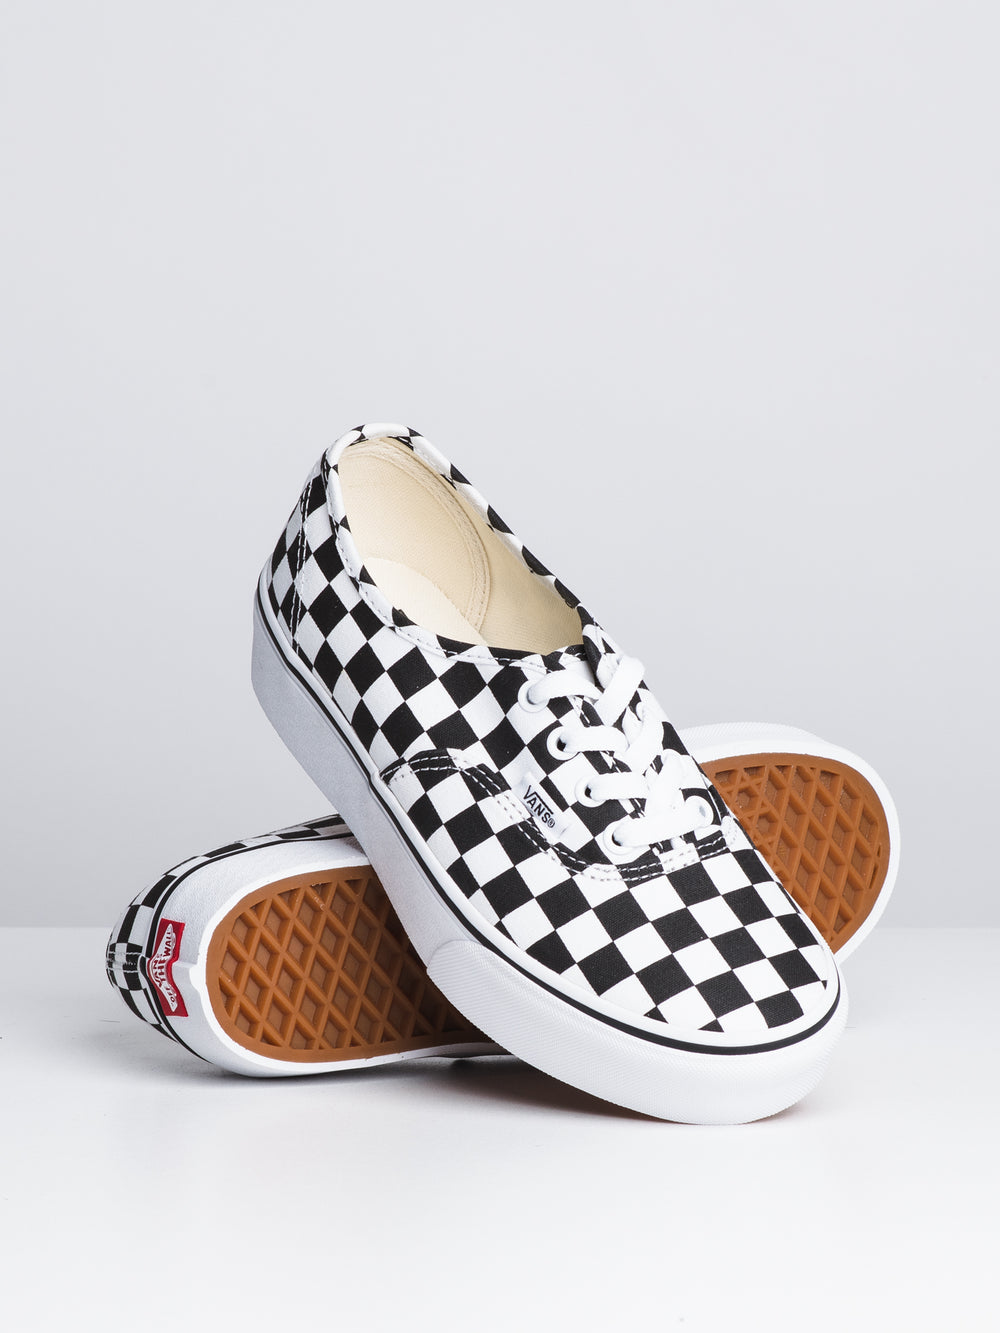 WOMENS VANS AUTHENTIC PLATFORM 2.0 CHECKER SNEAKERS - CLEARANCE